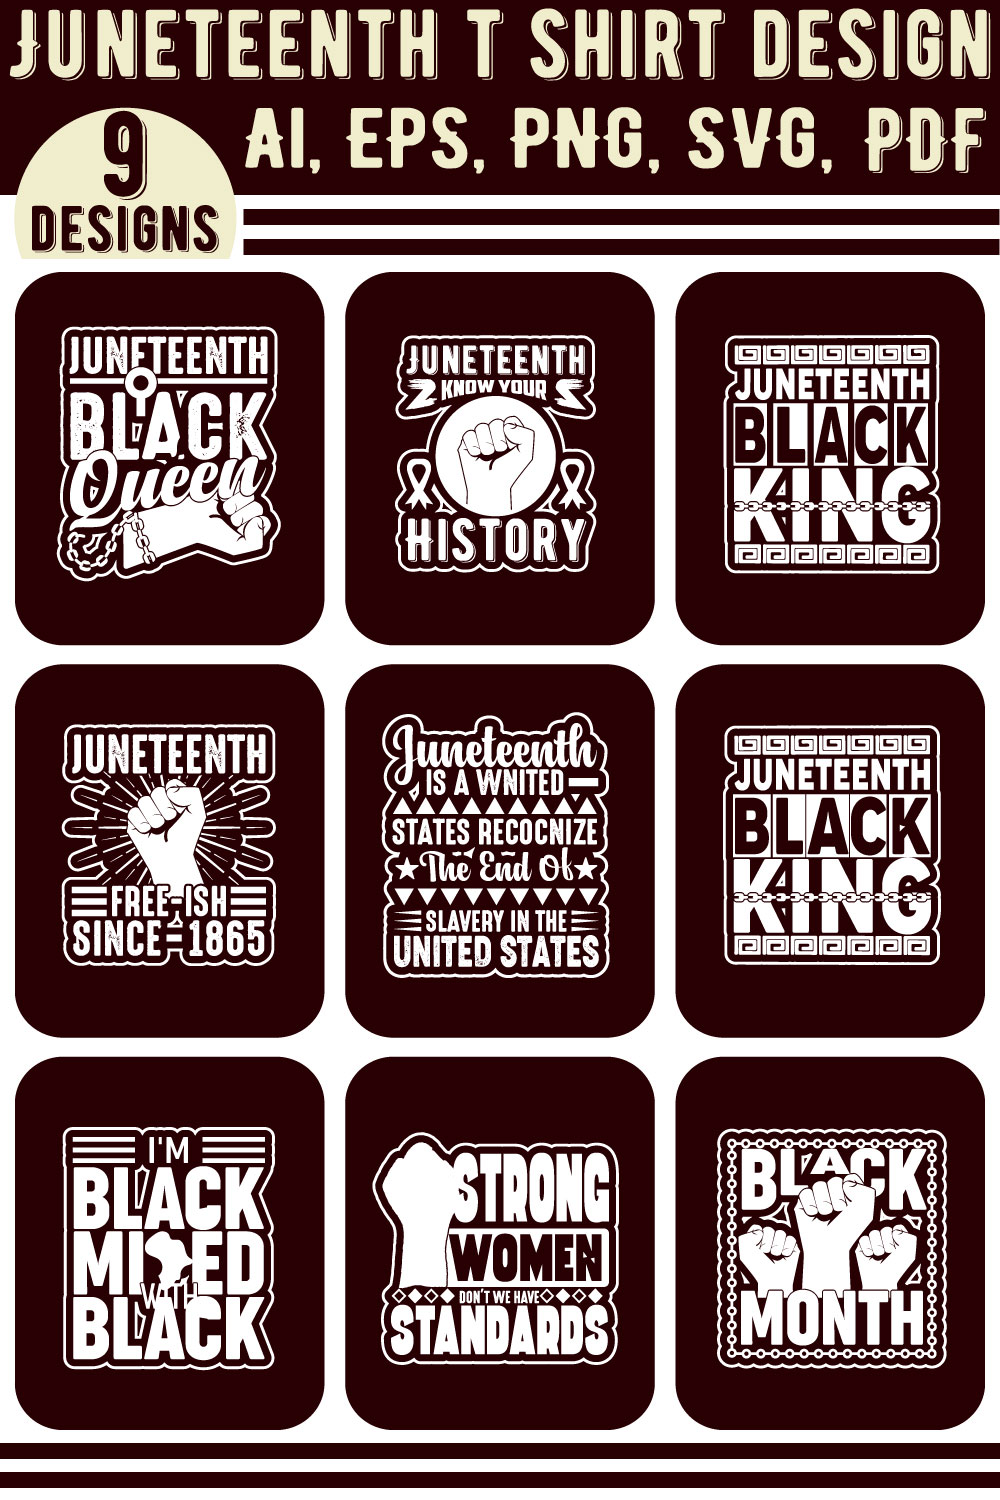 Juneteenth Black history month typography t shirt design pinterest preview image.